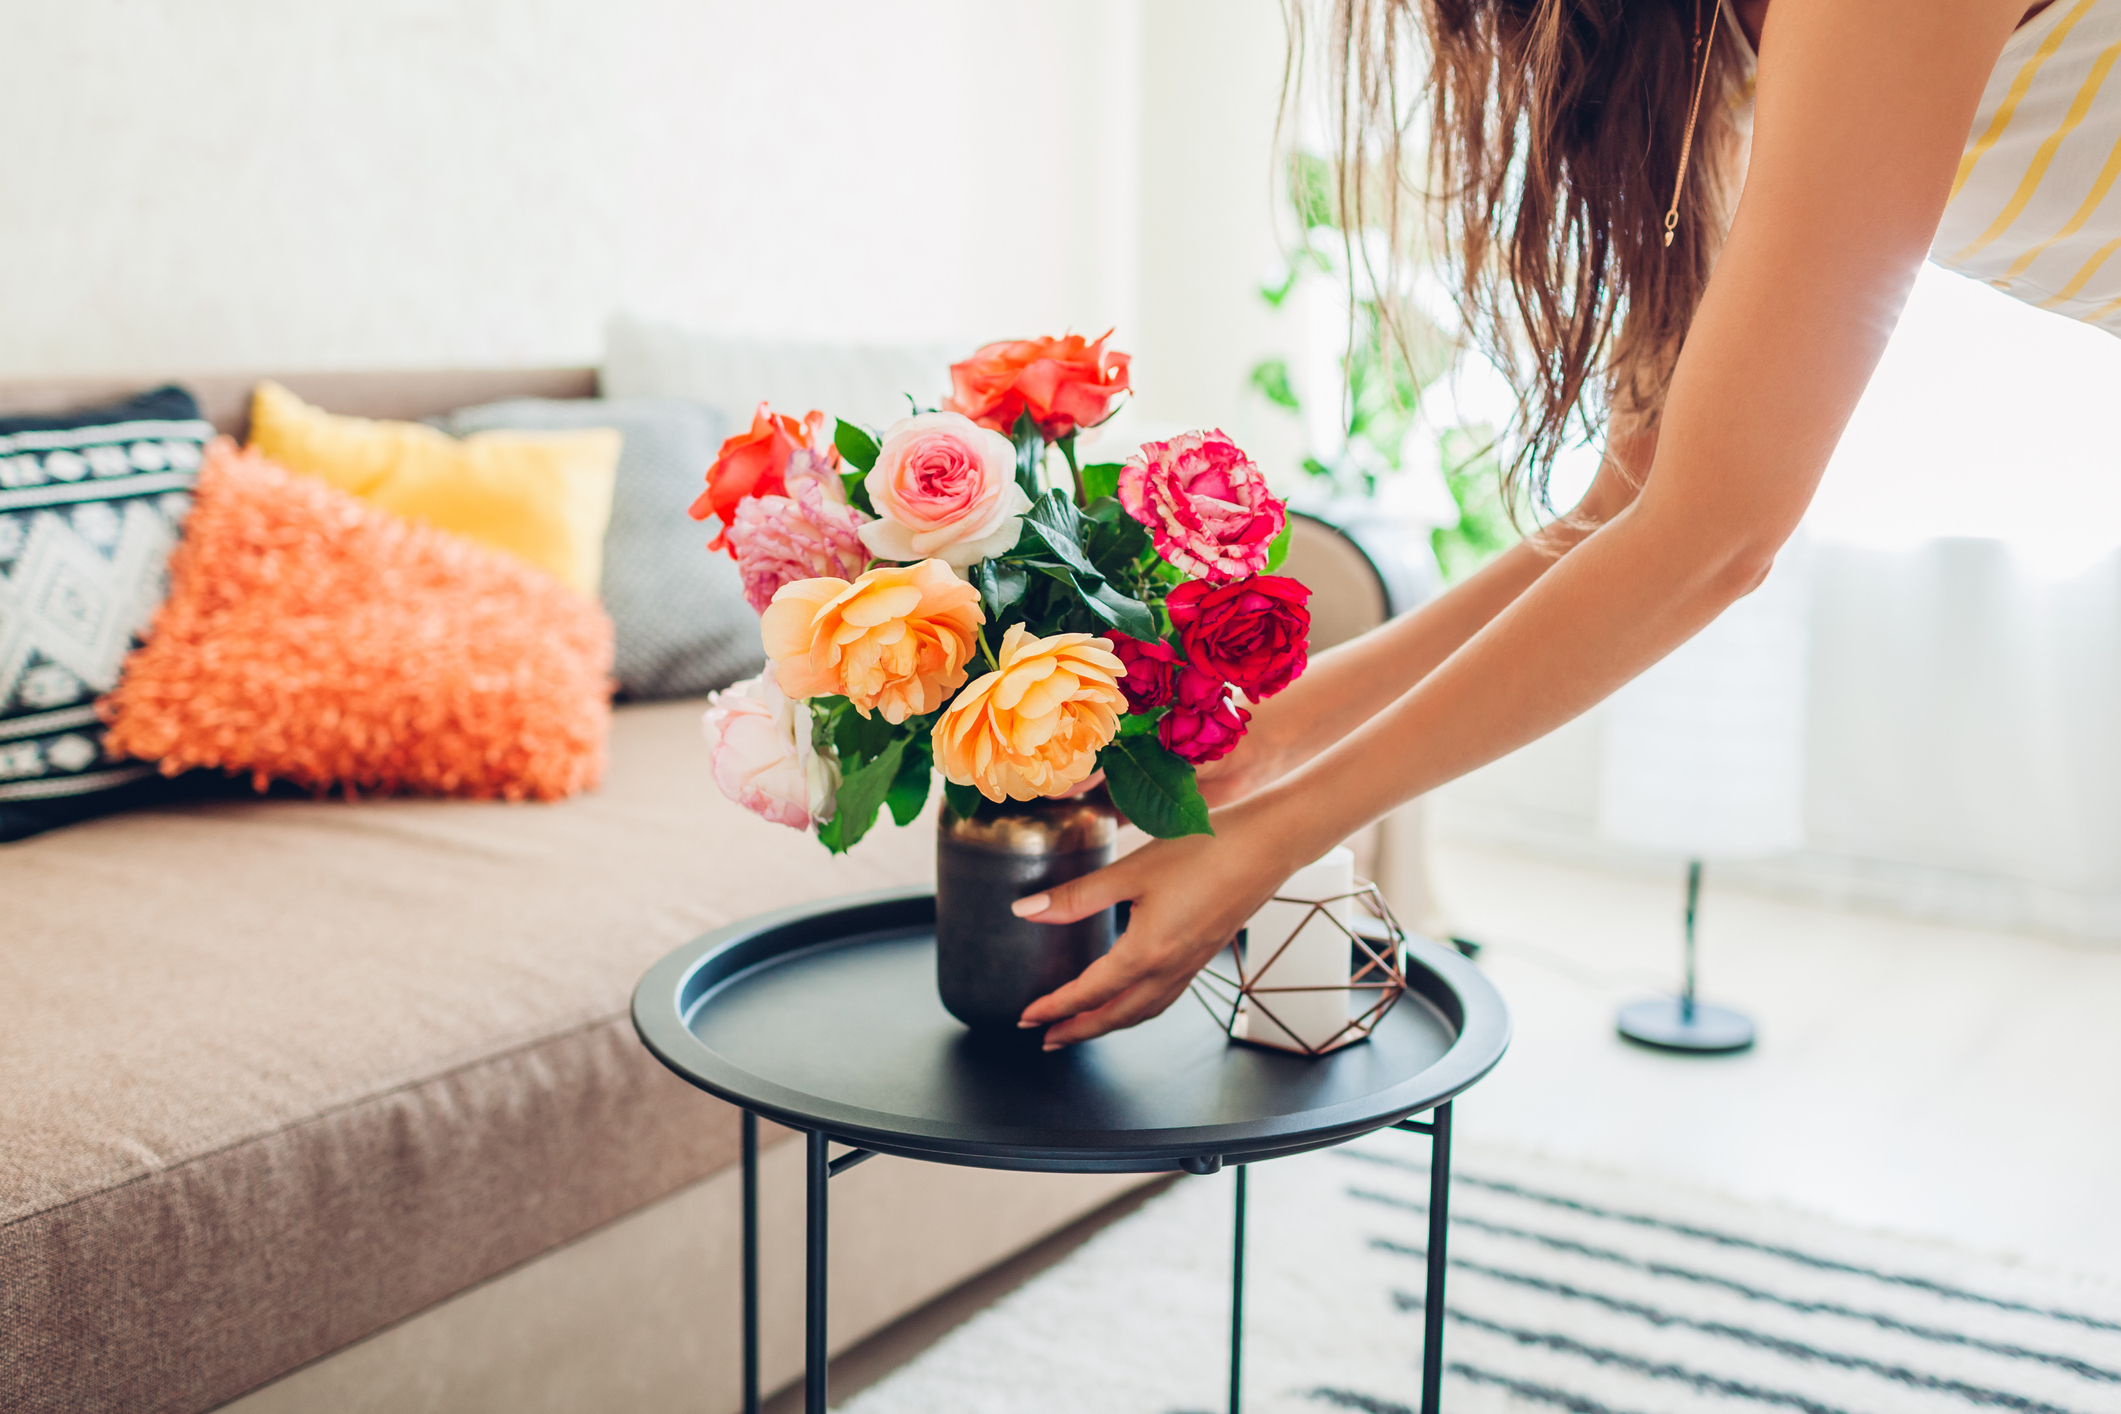 A woman arranging flowers on her coffee table